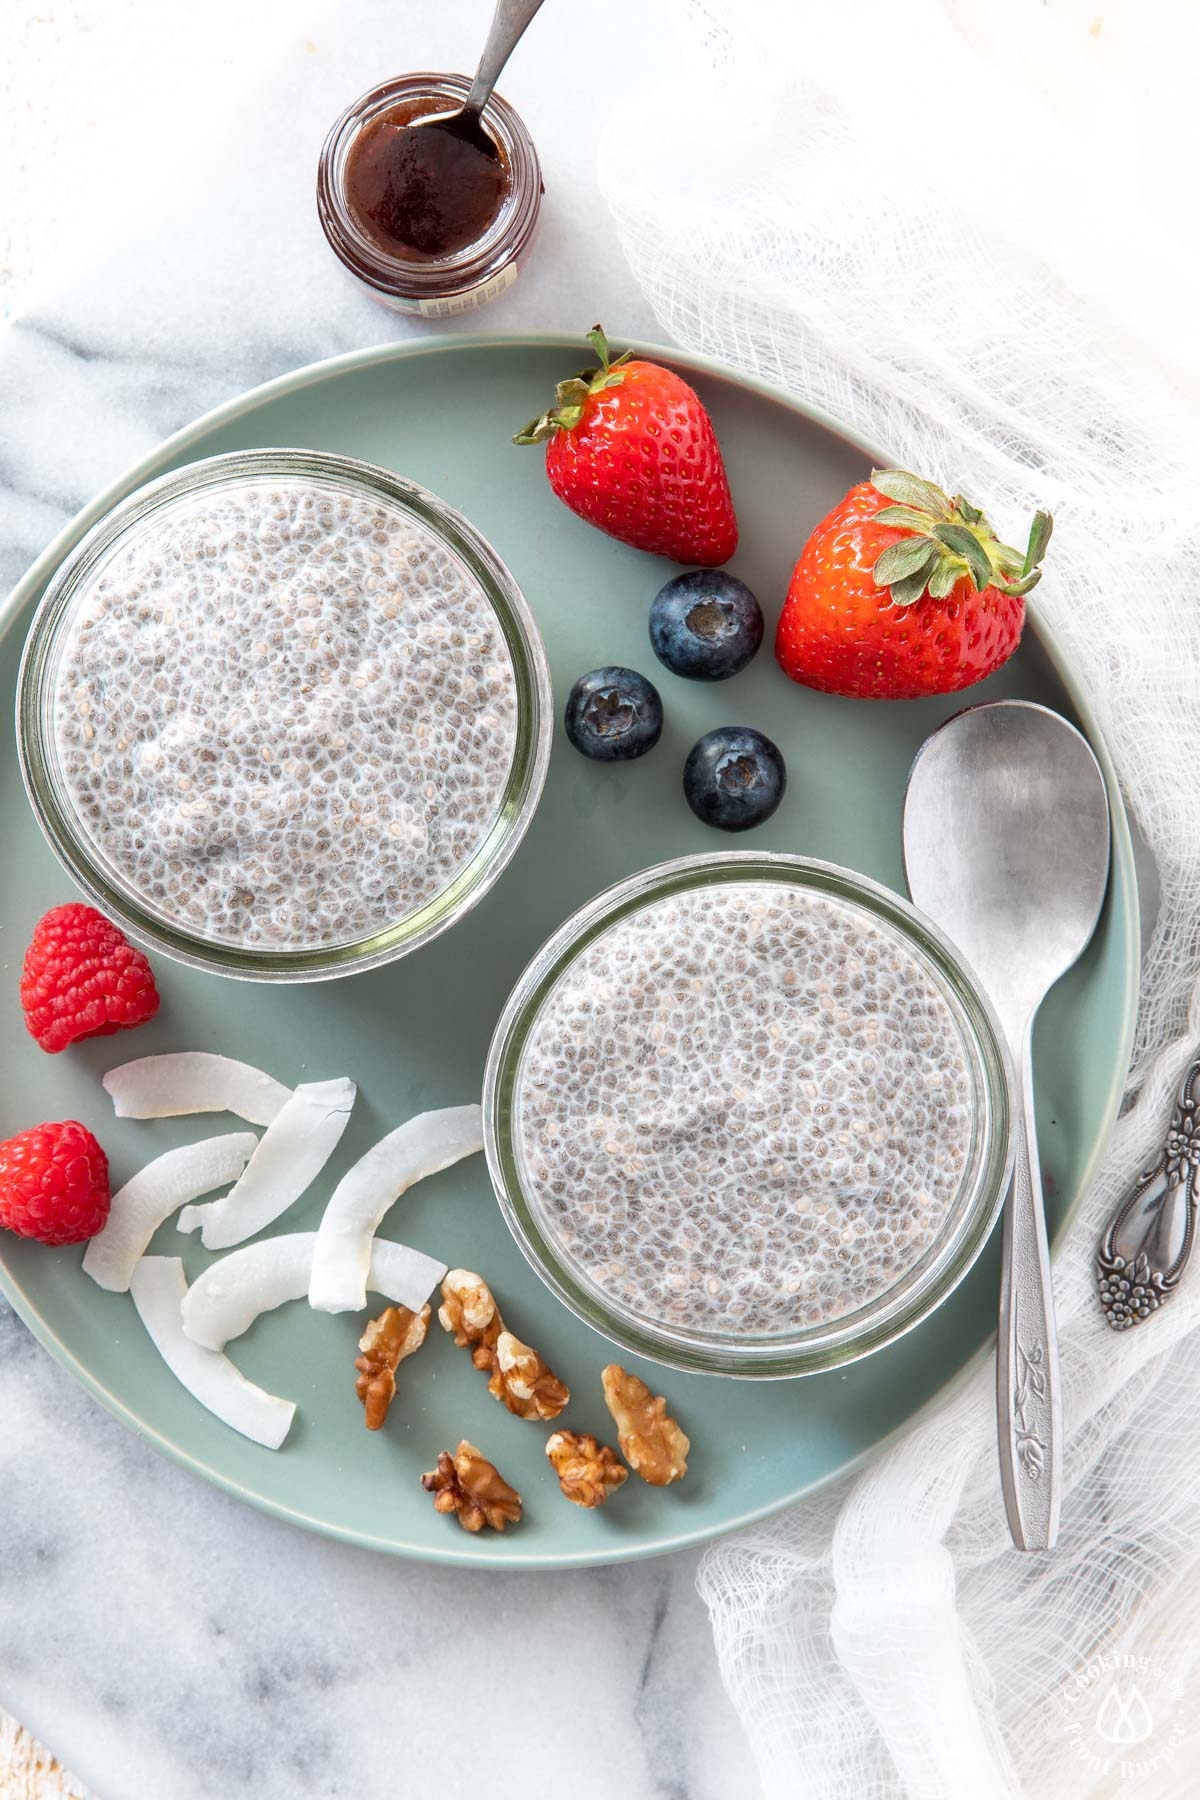 https://www.cookingonthefrontburners.com/wp-content/uploads/2022/01/Easy-Vanilla-Chia-Pudding-9.jpg